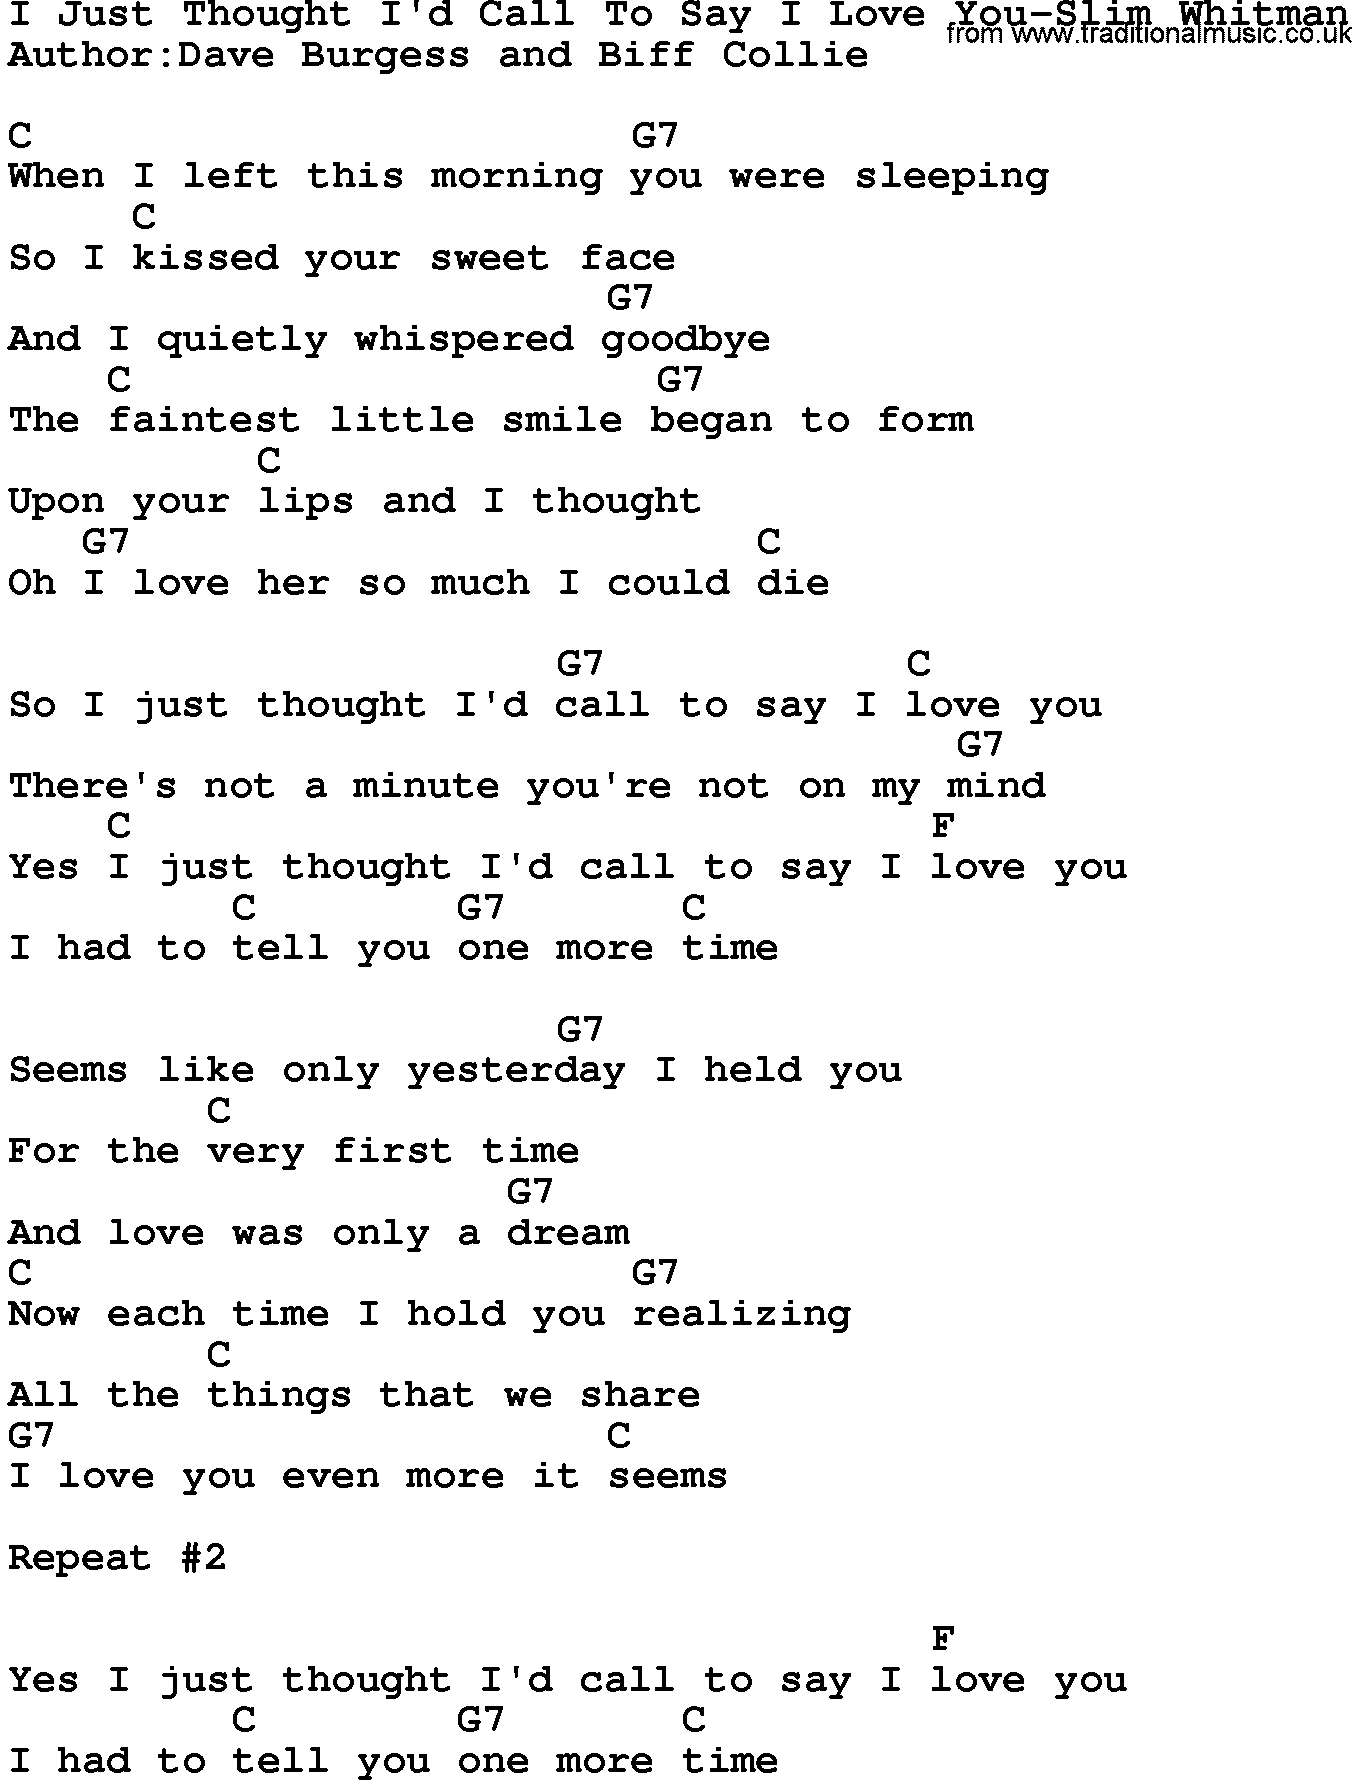 Country music song: I Just Thought I'd Call To Say I Love You-Slim Whitman lyrics and chords